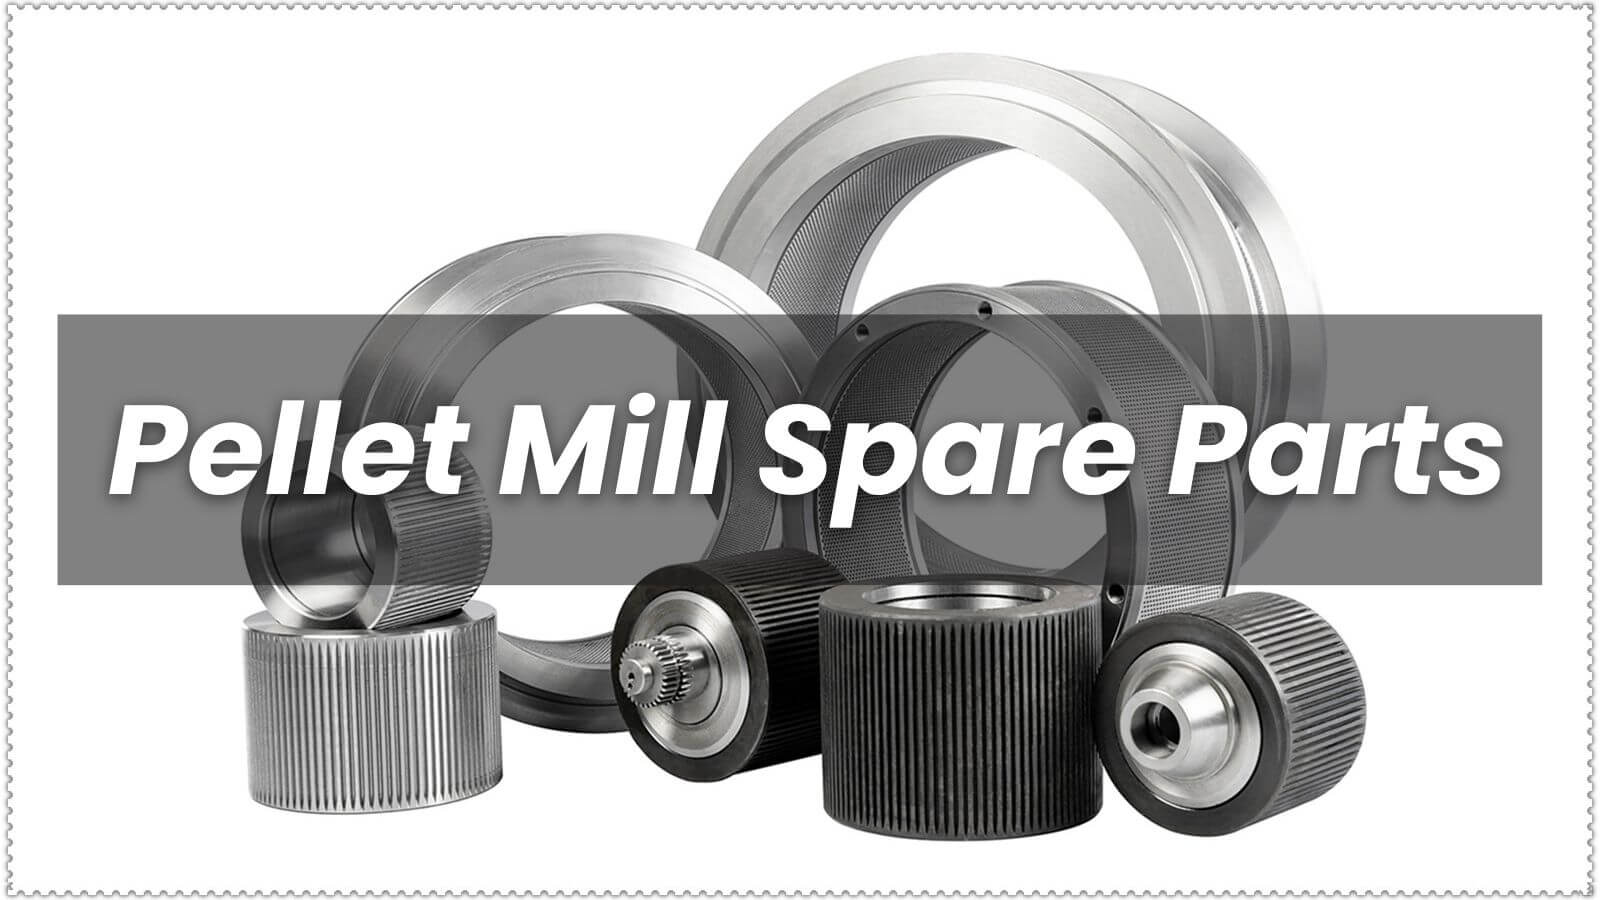 Pellet Mill Spare Parts Suppliers